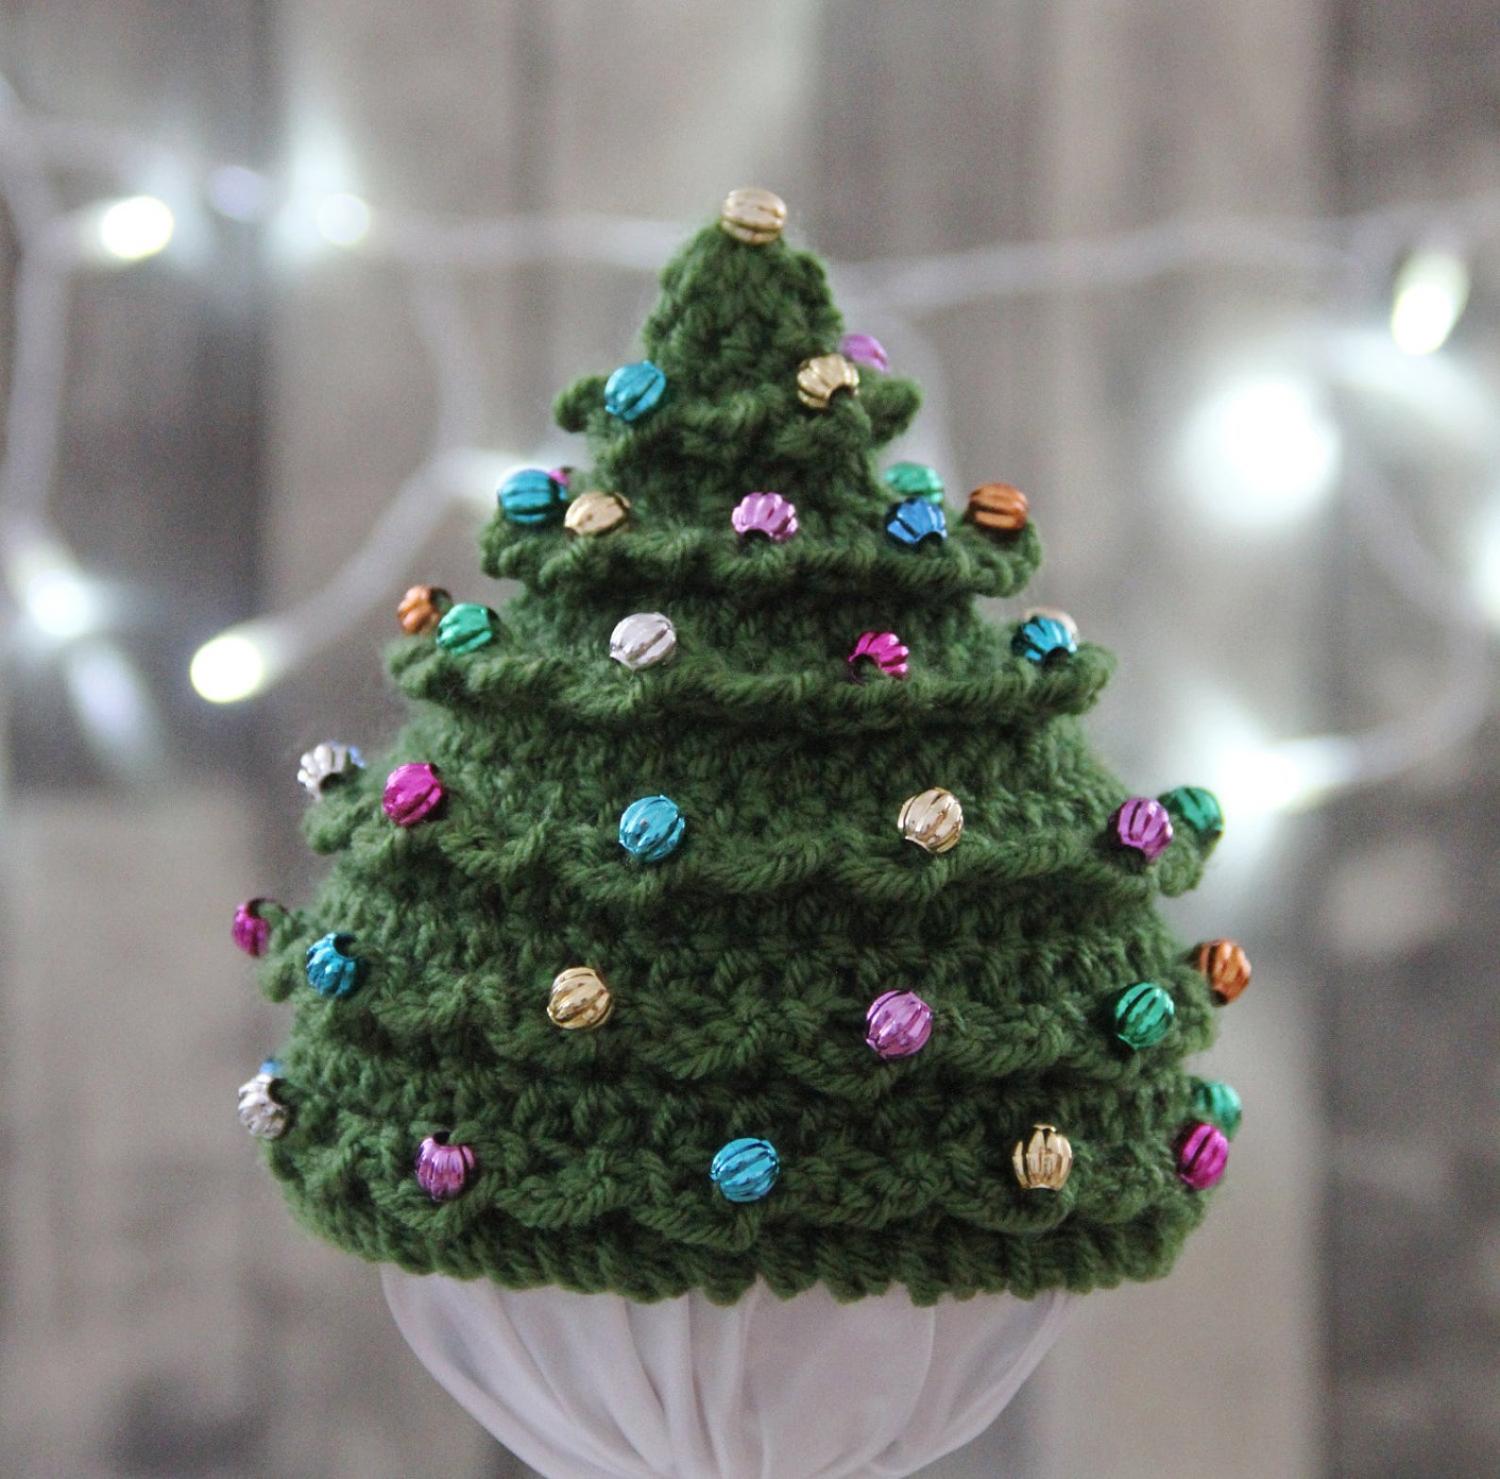 Christmas Tree Hats For Newborns and Toddlers - Crochet Christmas Tree Plans Pattern